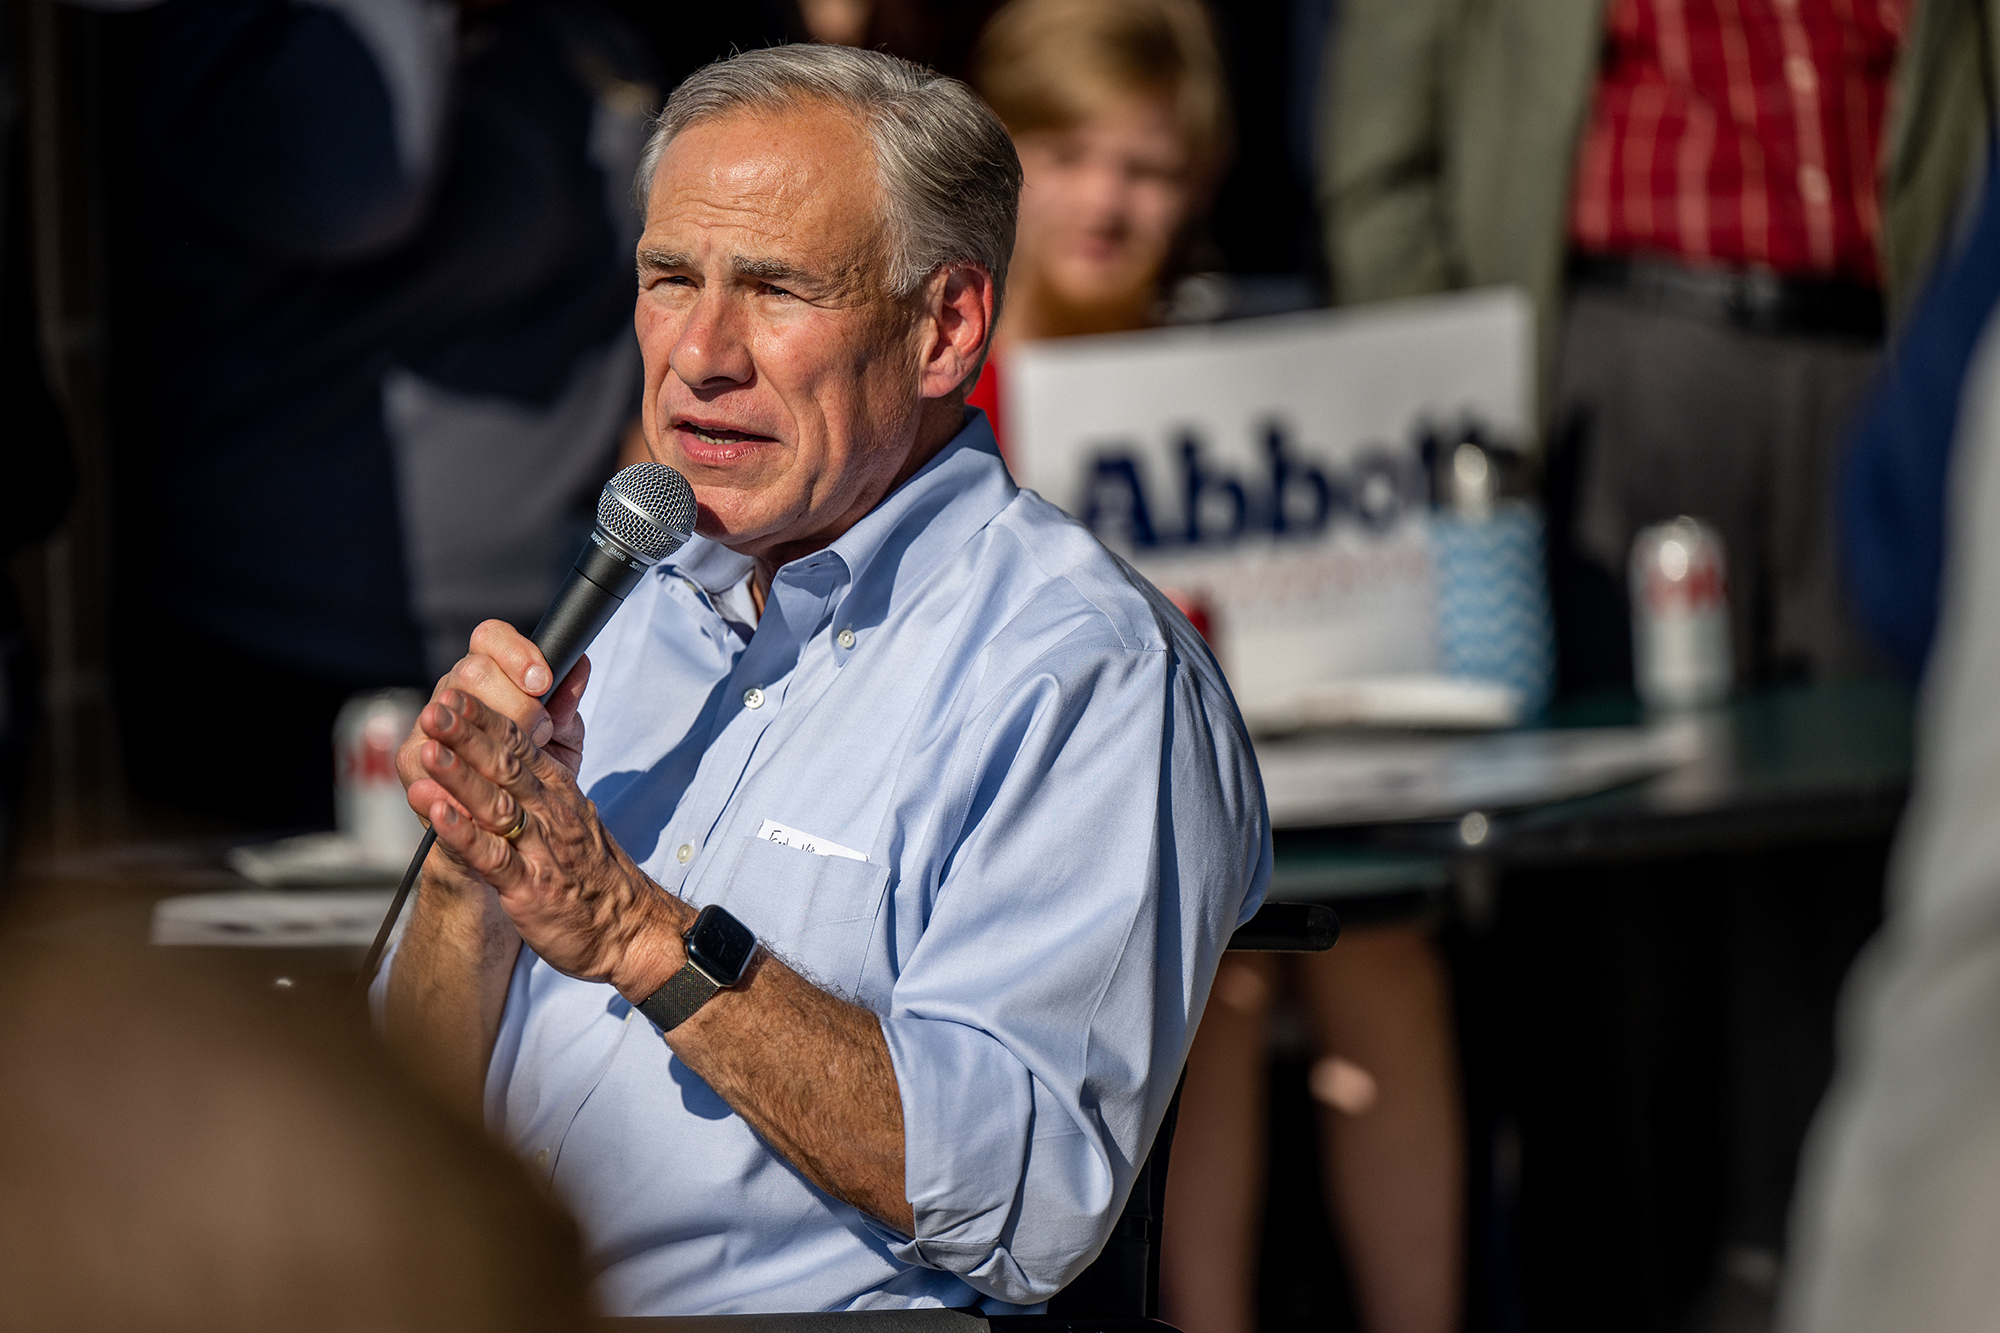 CNN Projection: Greg Abbott will defeat Beto O’Rourke in Texas governor’s race 